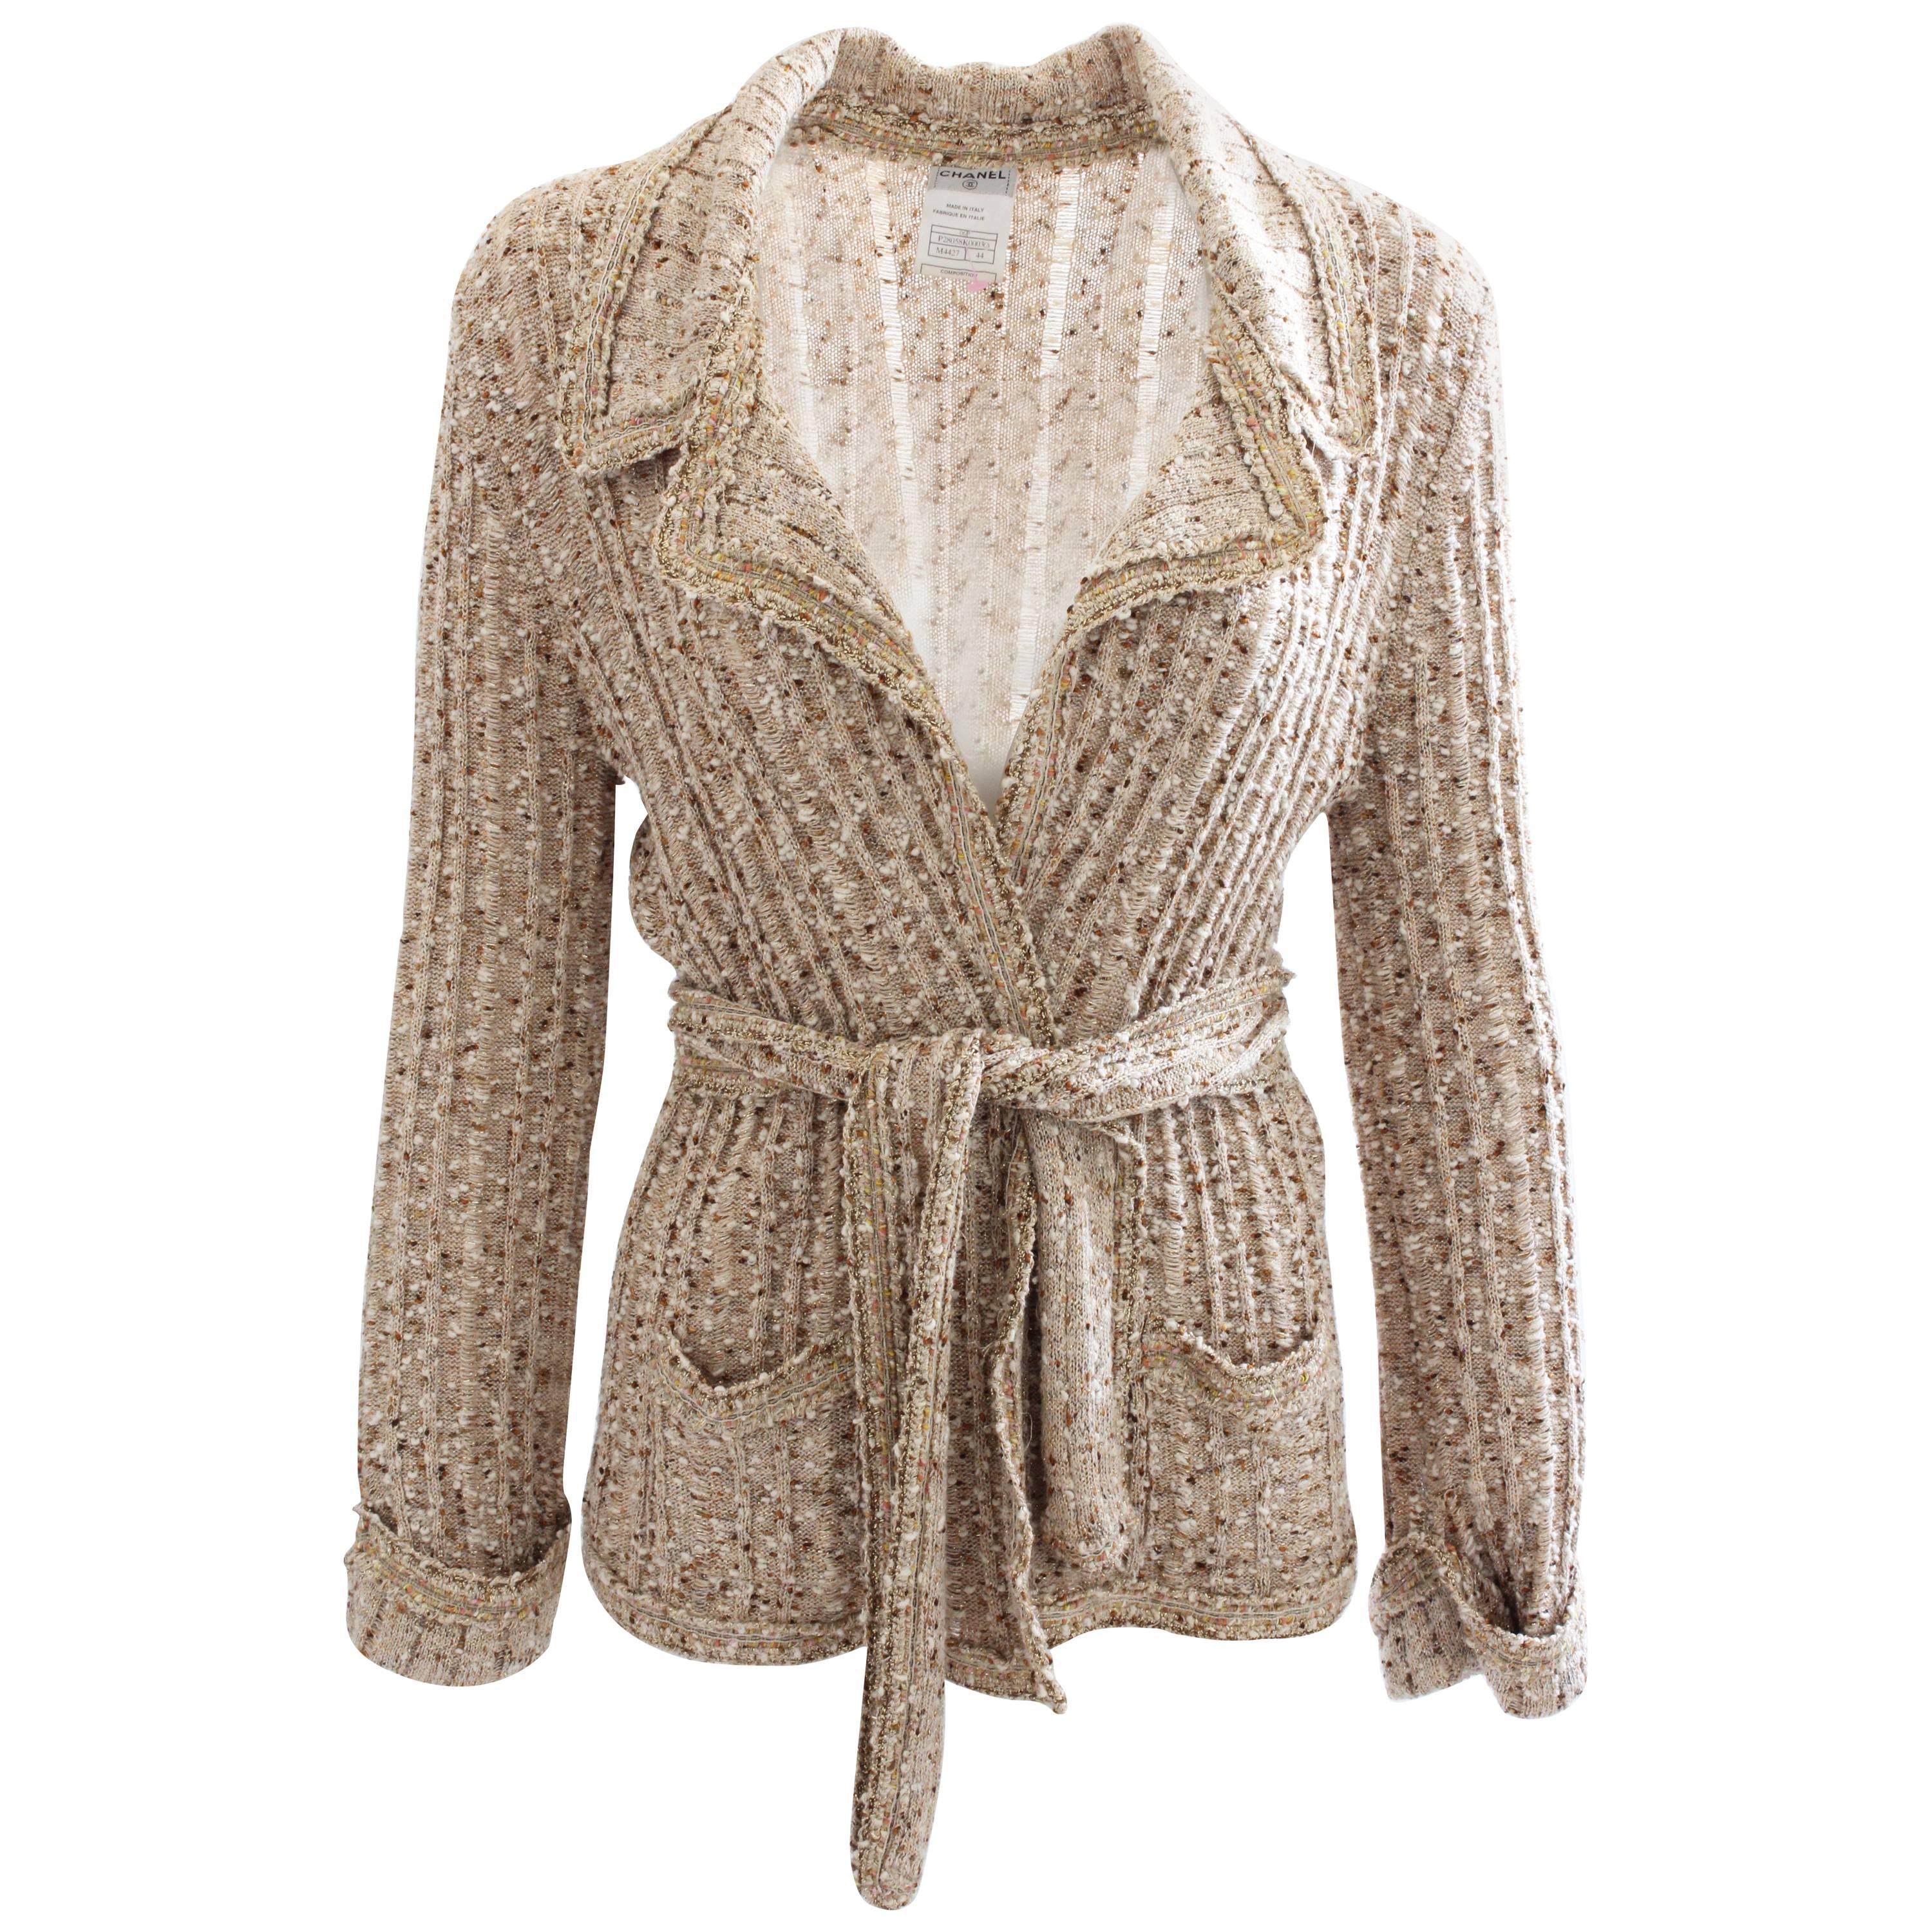 Chanel Boucle Knit Cardigan Sweater with Belt Oatmeal Tan 06P Collection Sz 44